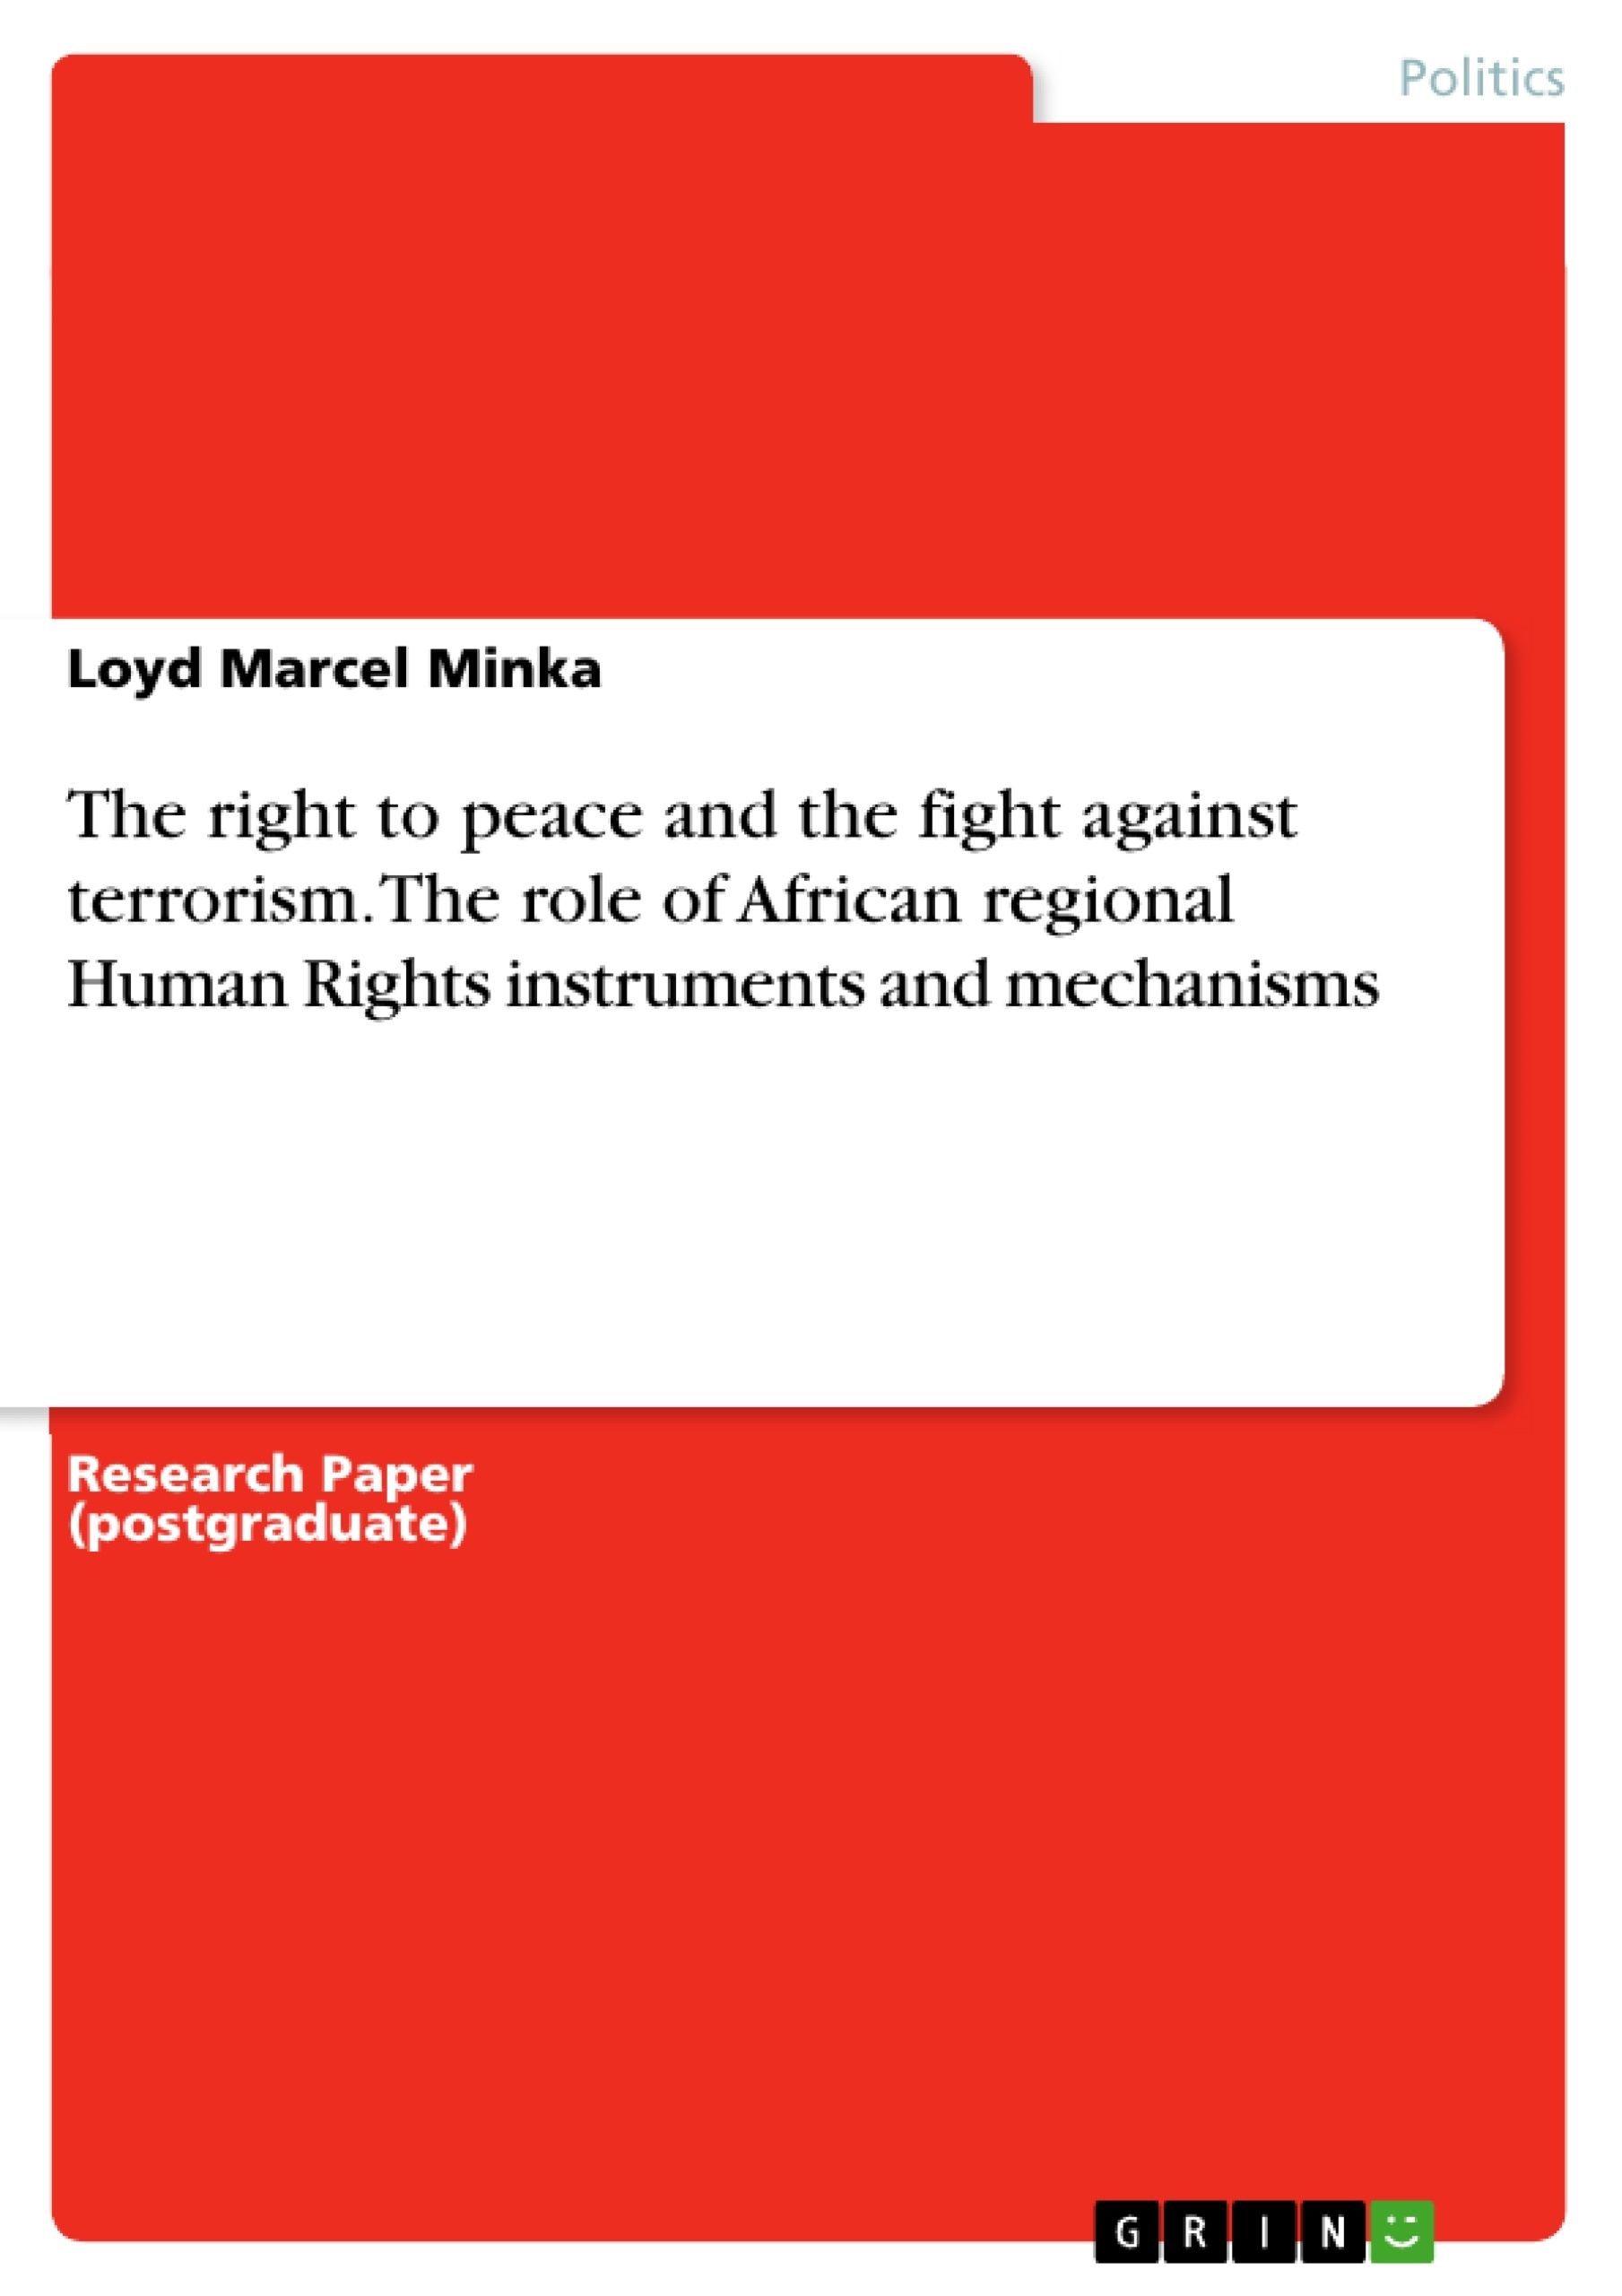 Titel: The right to peace and the fight against terrorism. The role of African regional Human Rights instruments and mechanisms